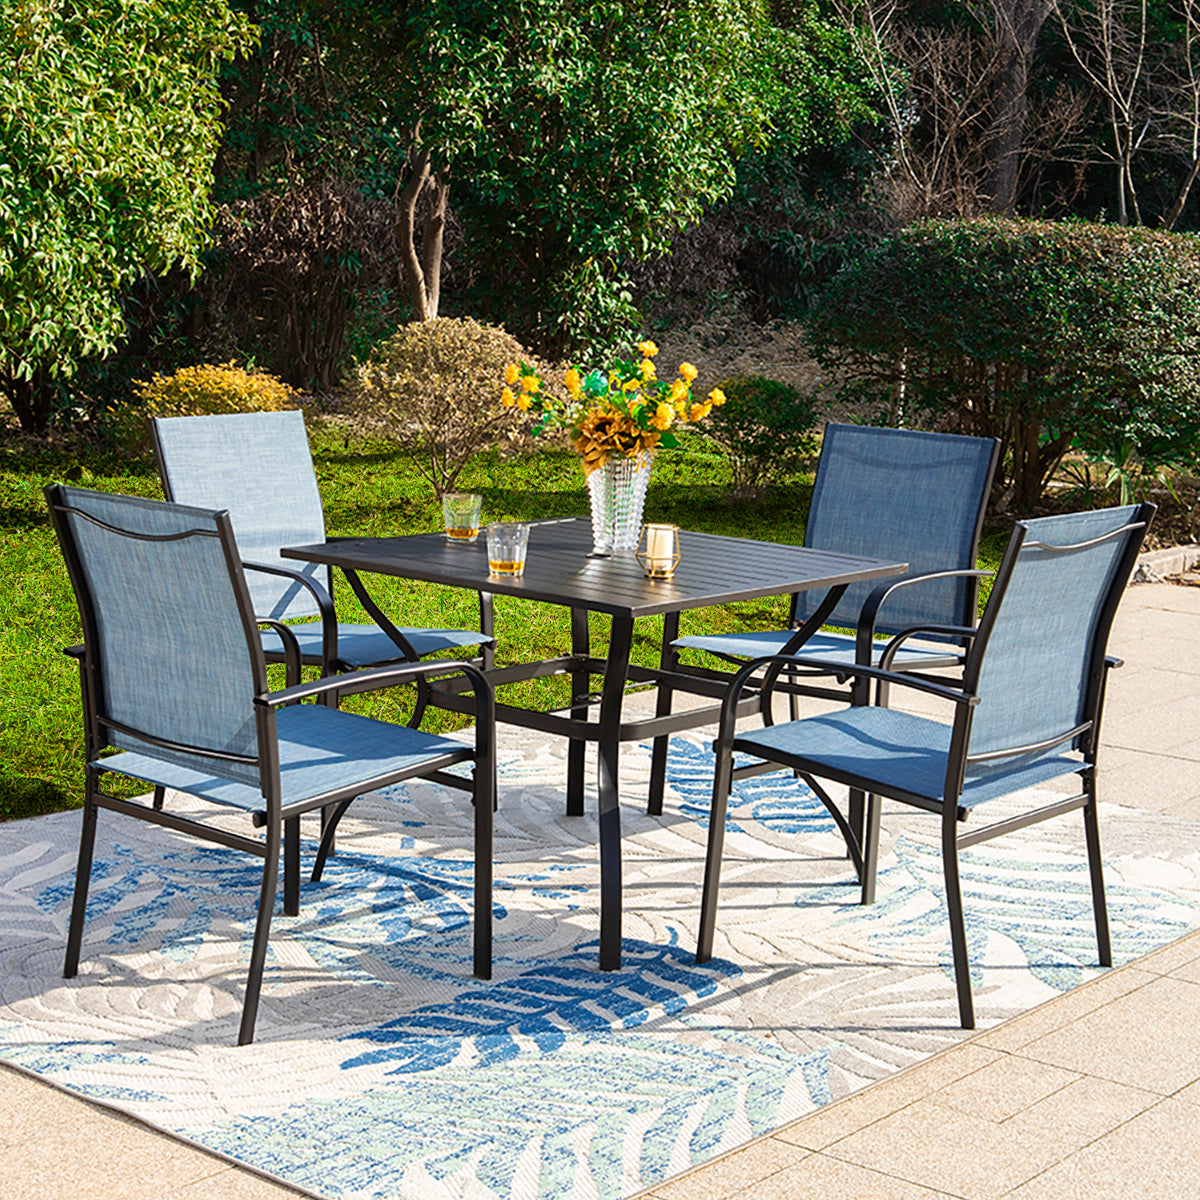 Sophia & William 5-Piece Patio Dining Sets Square Table & Light-weight Textilene Fixed Chairs